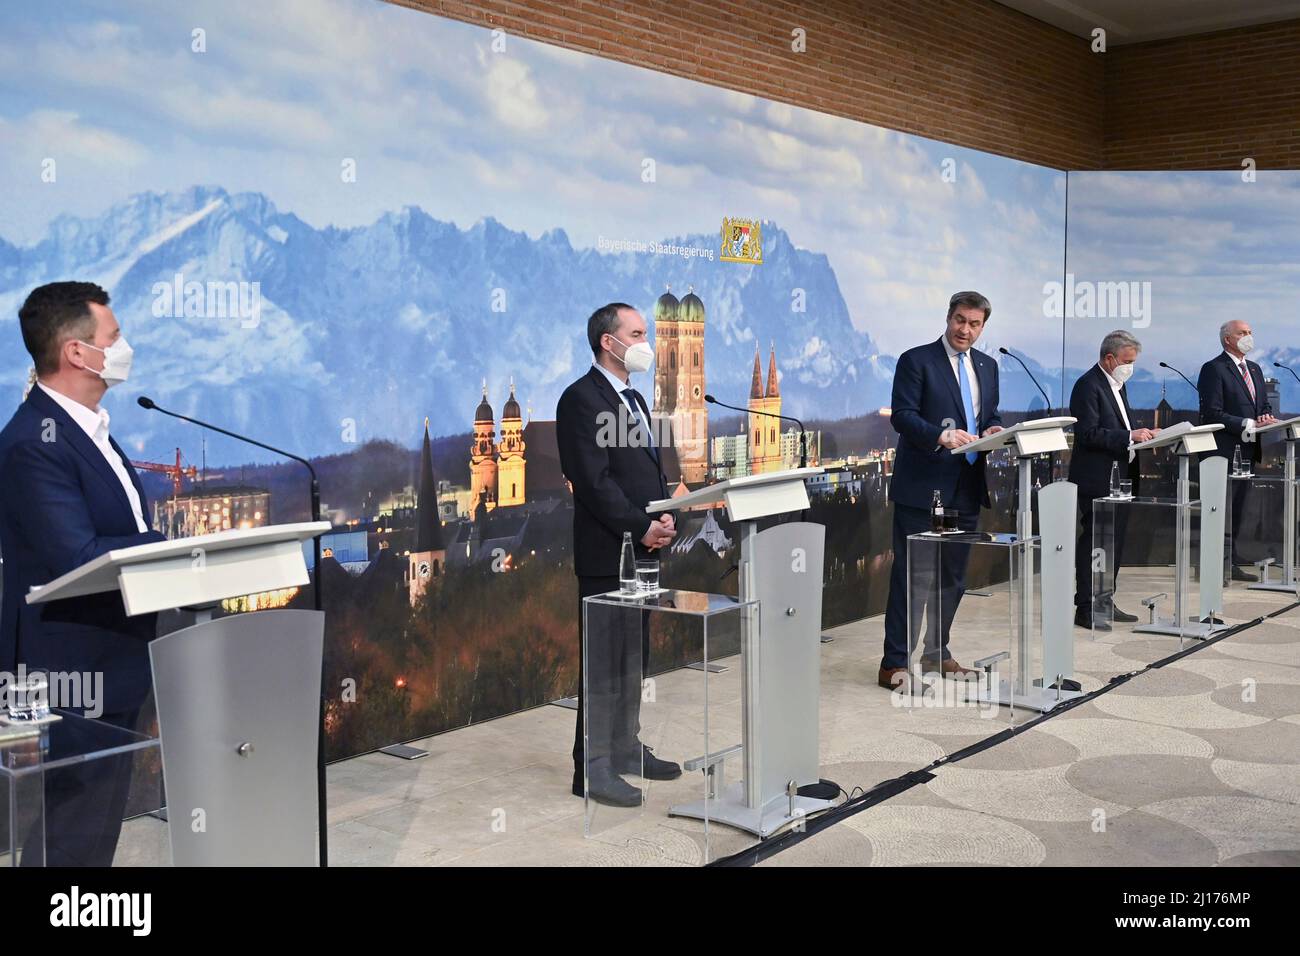 From left: Chief Executive of the Bavarian Chamber of Commerce and Industry Dr. Manfred Goessl, Hubert AIWANGER (free voters, Bavarian Minister of Economic Affairs), Markus SOEDER (Prime Minister of Bavaria and CSU Chairman), Chief Executive of the Bavarian Economy Association Bertram Brossardt, President of the Bavarian Crafts Day Franz Xaver Peteranderl. Press conference of the Bavarian State Government after the Bavarian Energy Convention on March 23, 2022 in the Prince Carl Palais in Munich. Stock Photo